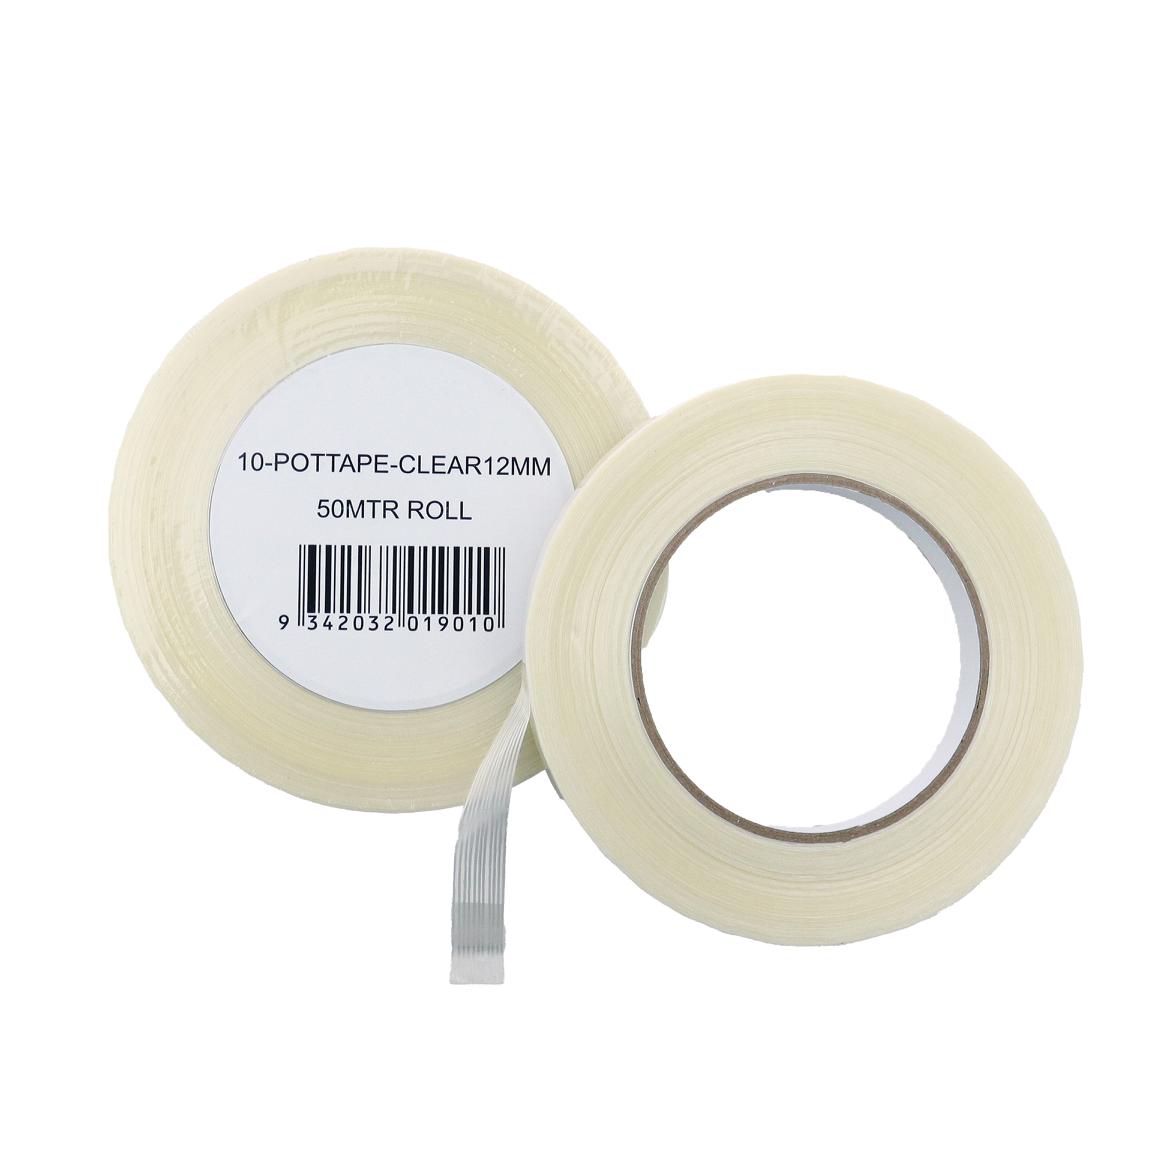 10-POTTAPE-CLEAR12MM